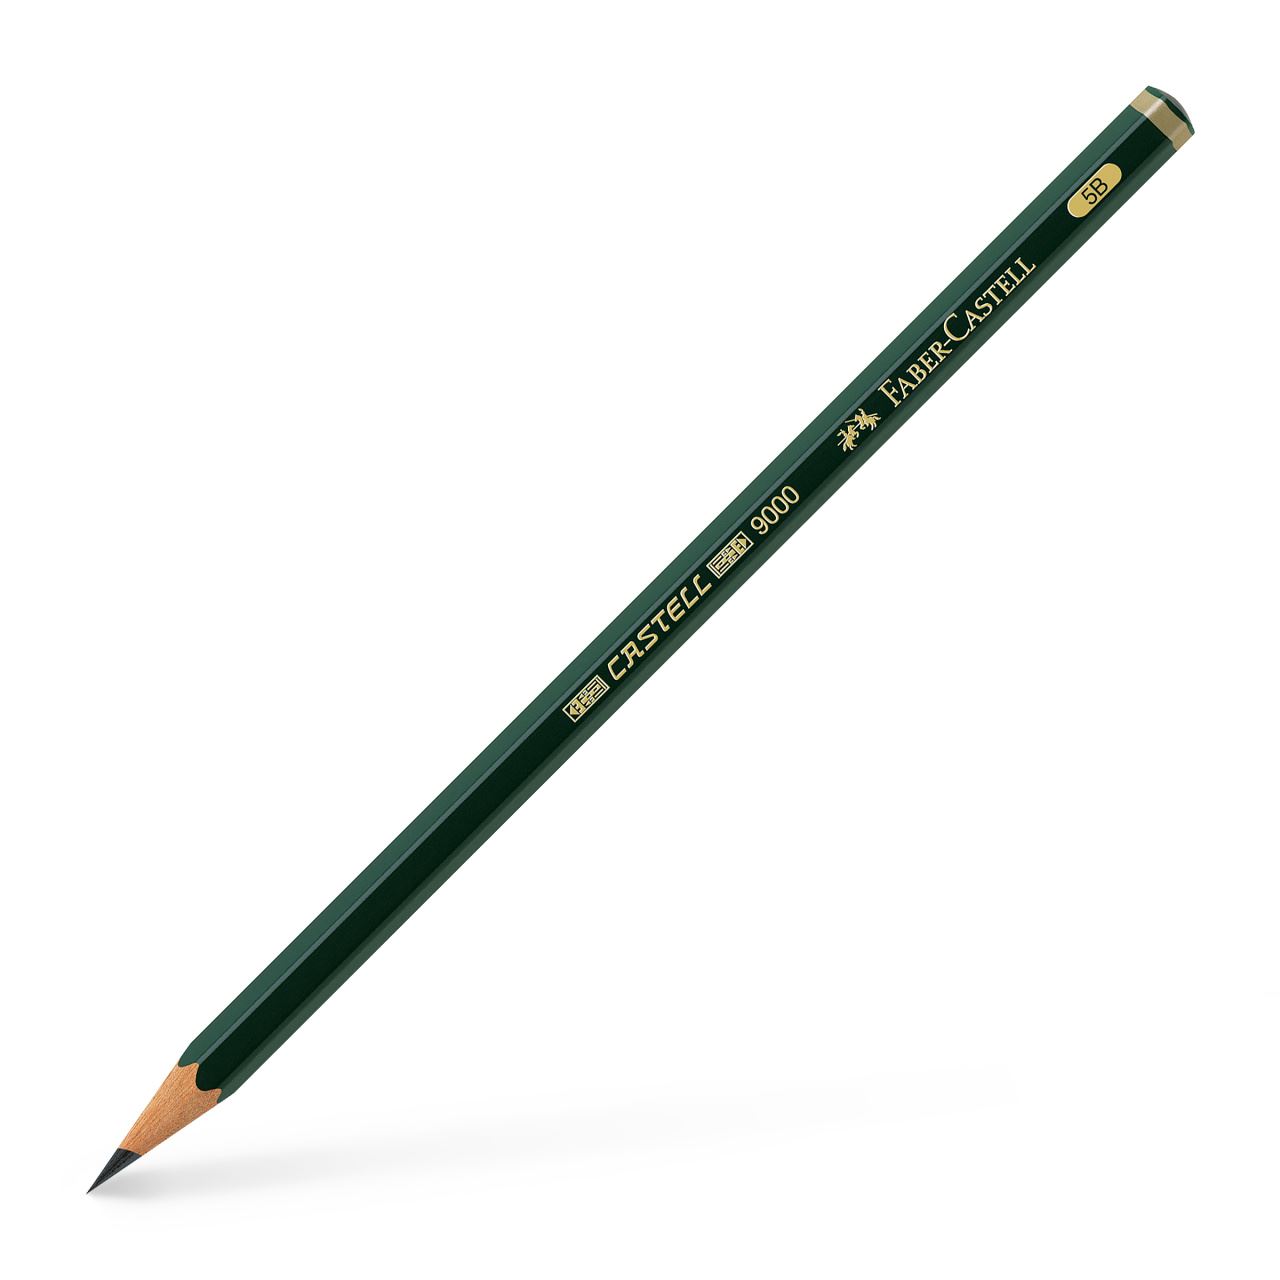 Faber-Castell - Castell 9000 graphite pencil, 5B